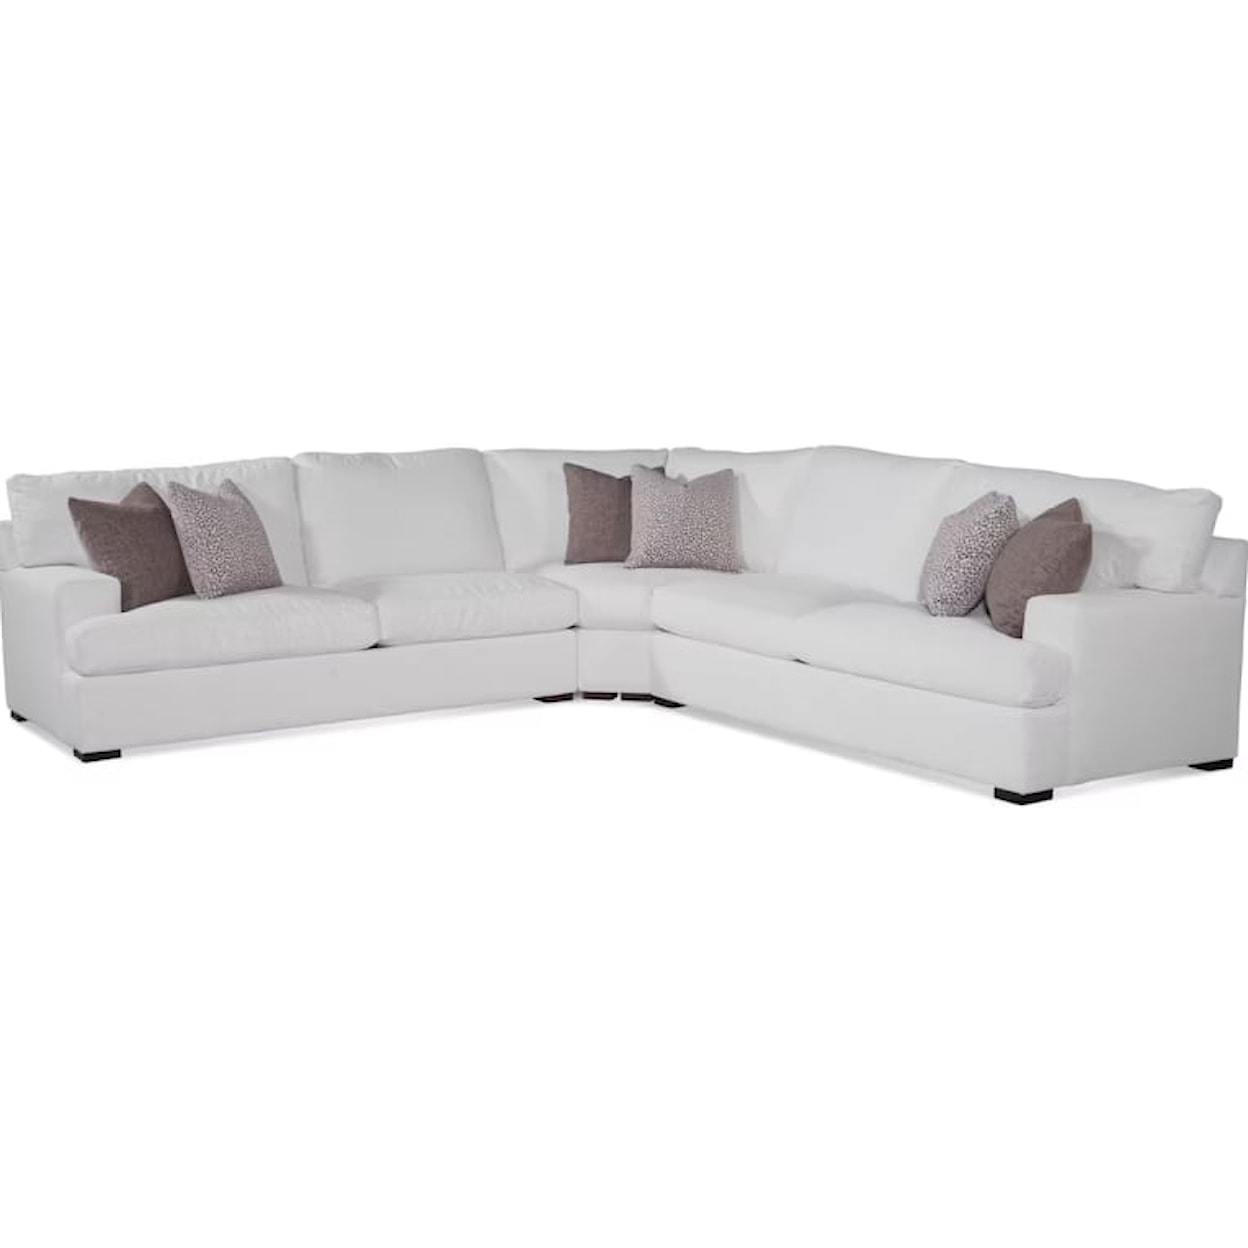 Braxton Culler Cambria 3-Piece Wedge Sectional